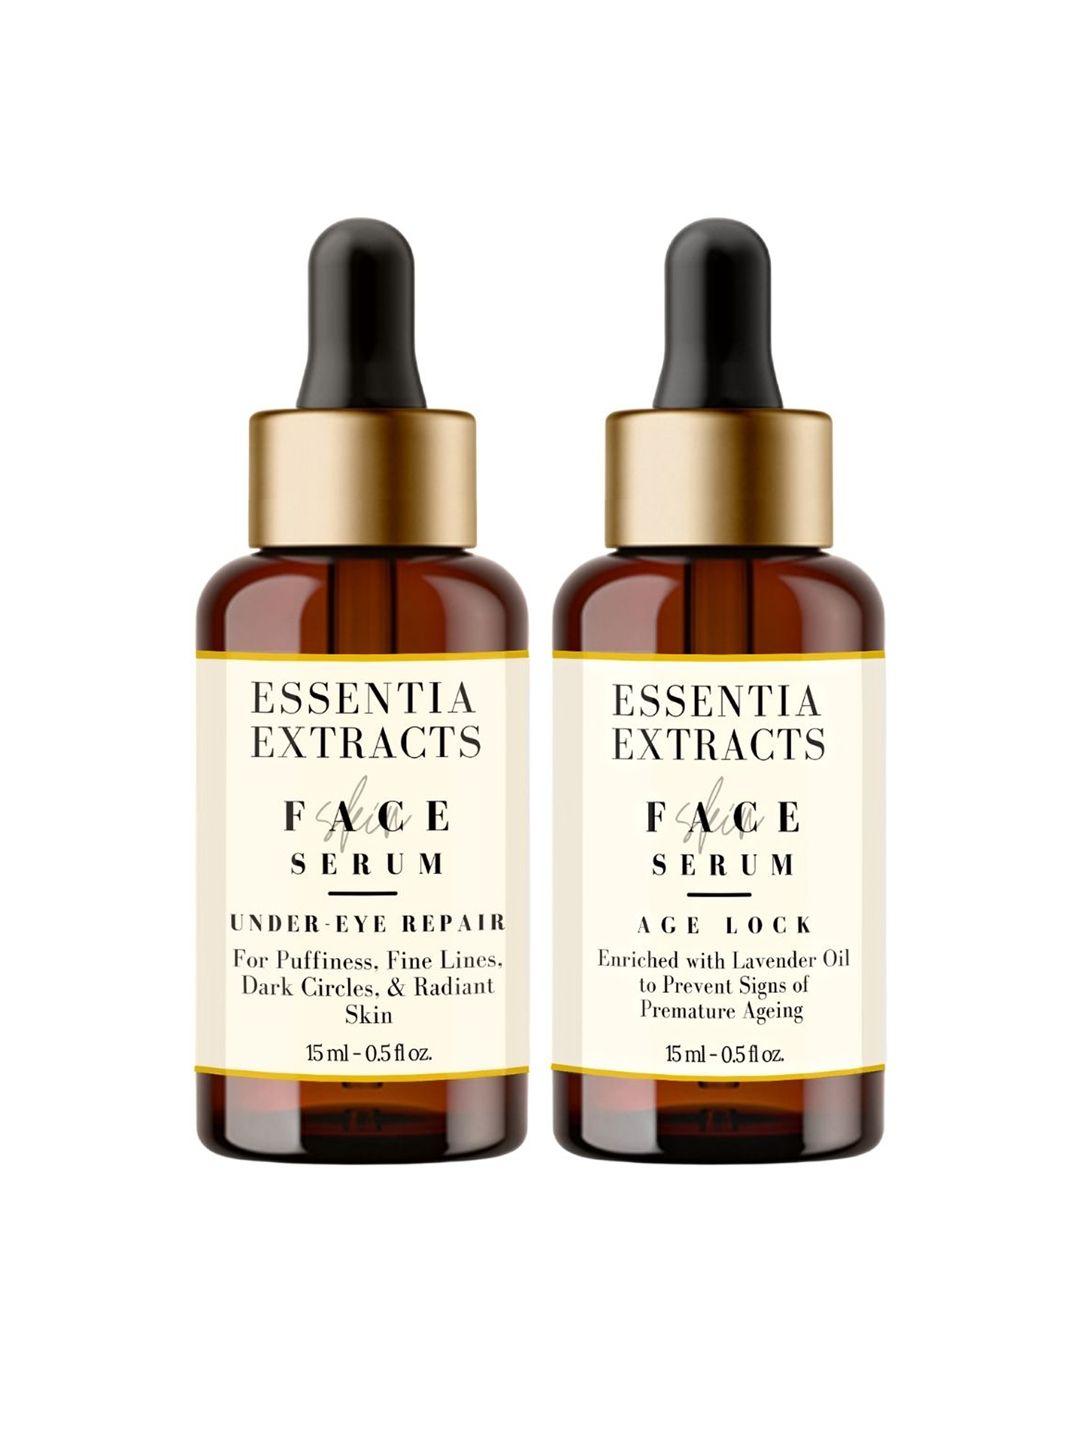 essentia extracts set of under-eye repair & age lock face serums - 15 ml each